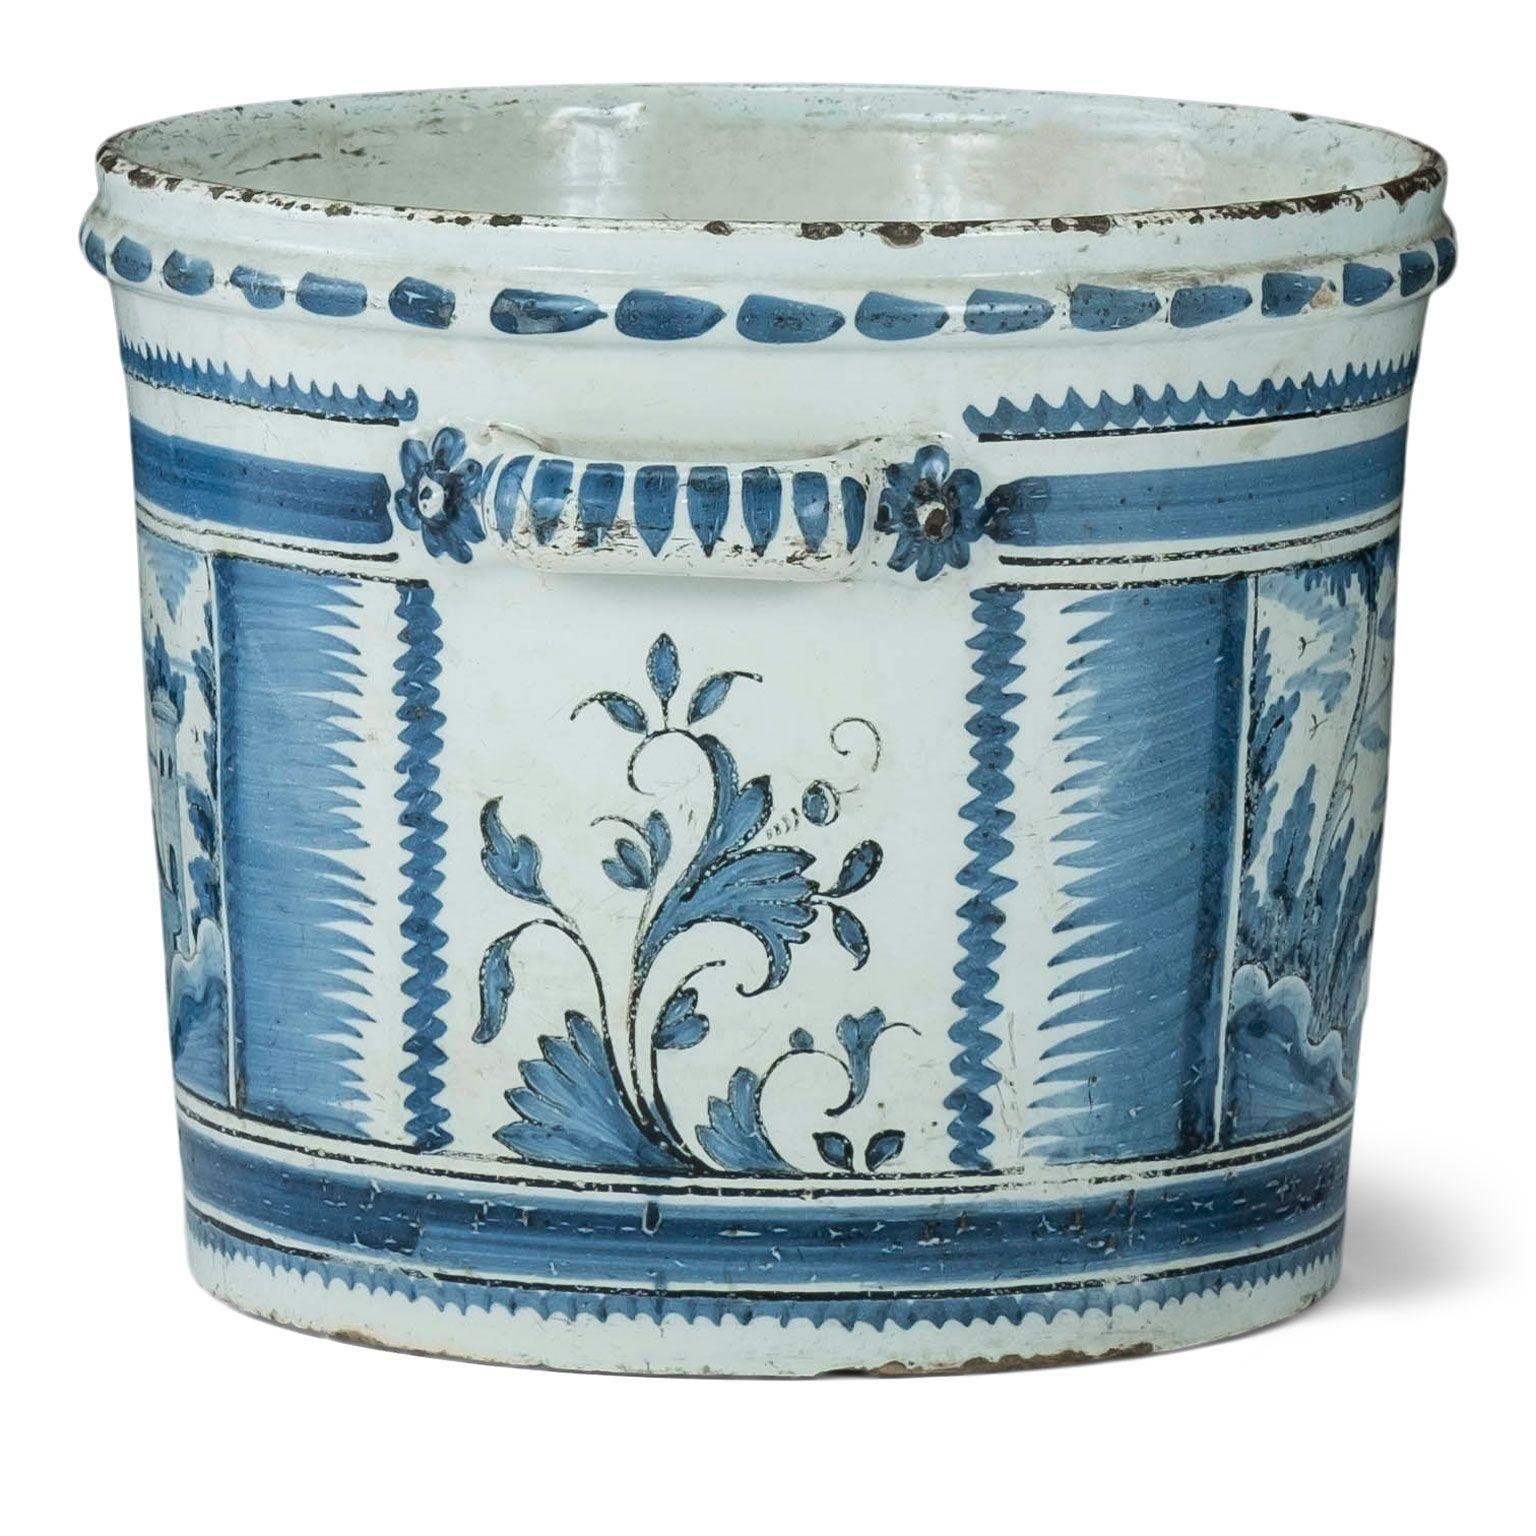 Nevers Faience 'Pot a Oranger' adorned with painted farmhouse scenes and scrolled decoration in shades of blue (camaieu bleu). This circa 1780-1800 tin-glazed planter comes from Nevers, France, an important site of faience production in the 18th